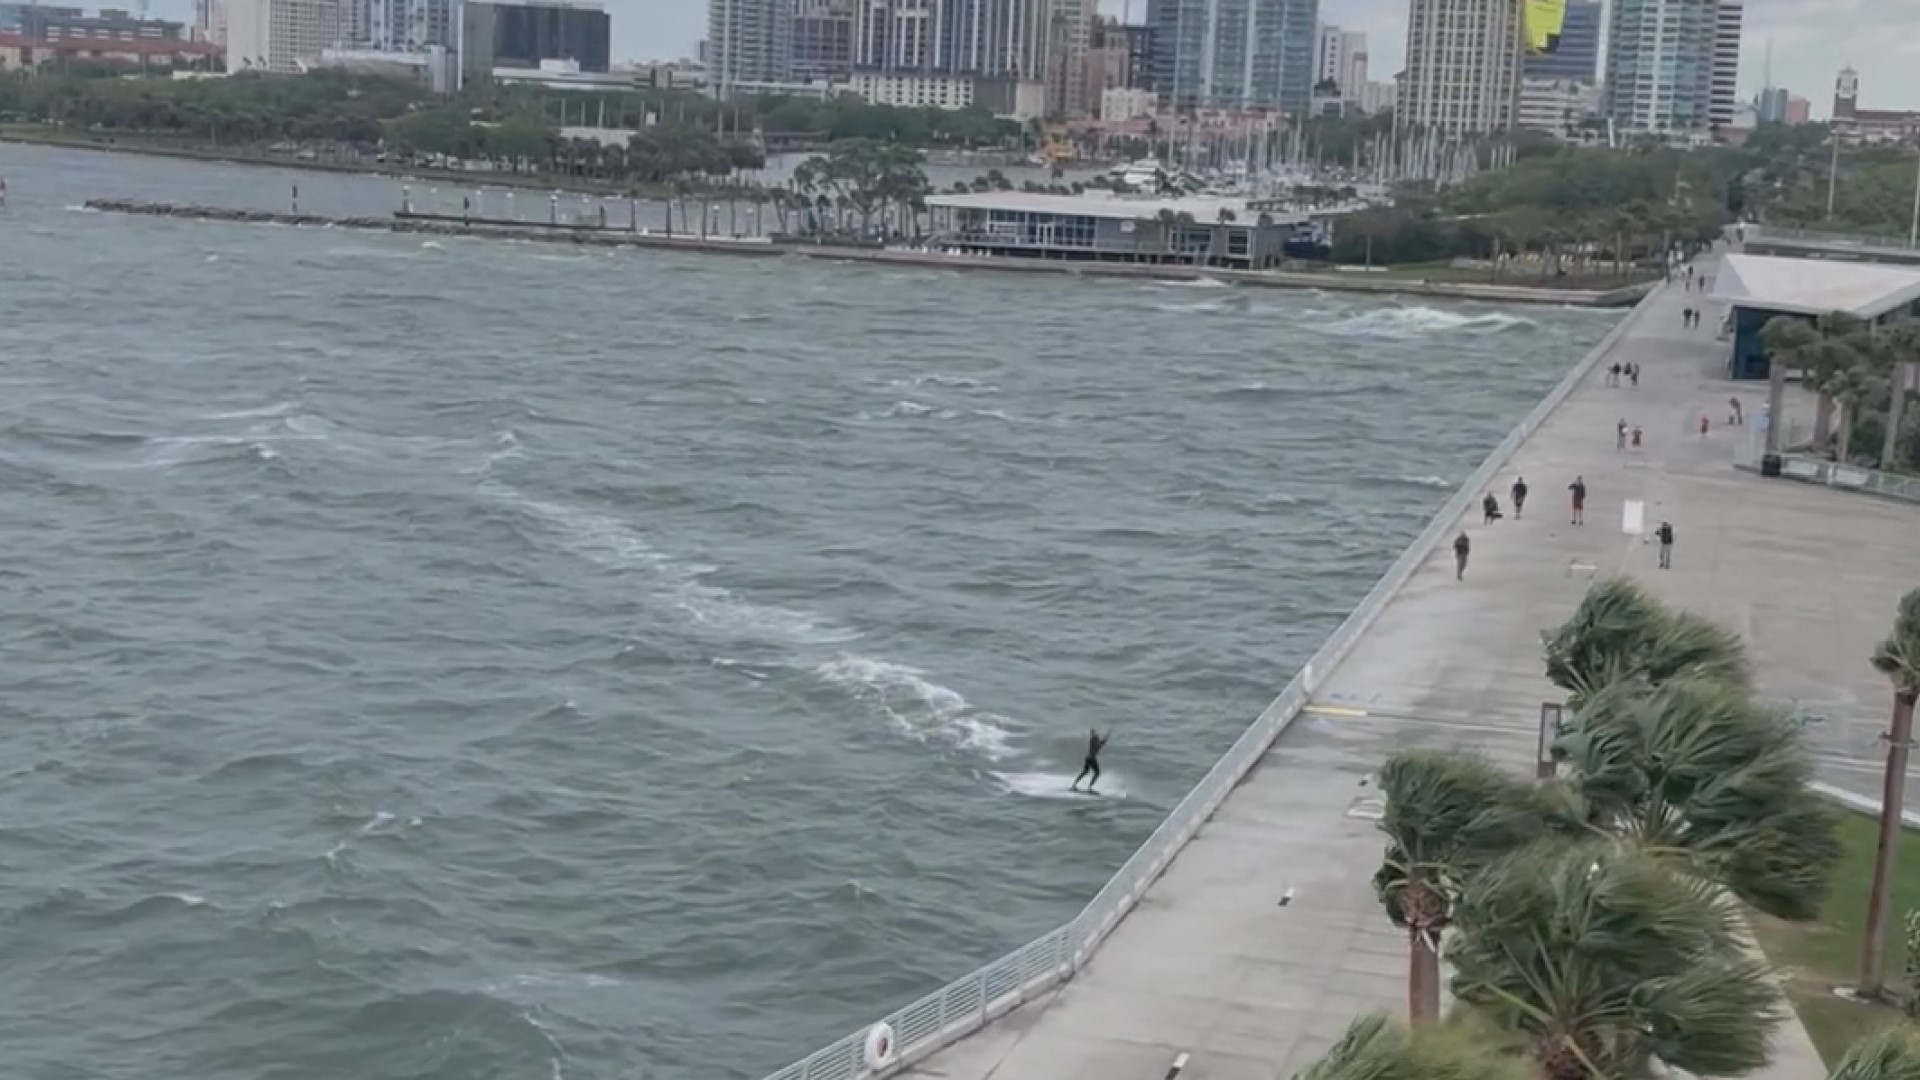 A 38-year-old man was injured after a kiteboarding crash Friday morning at the St. Pete Pier.